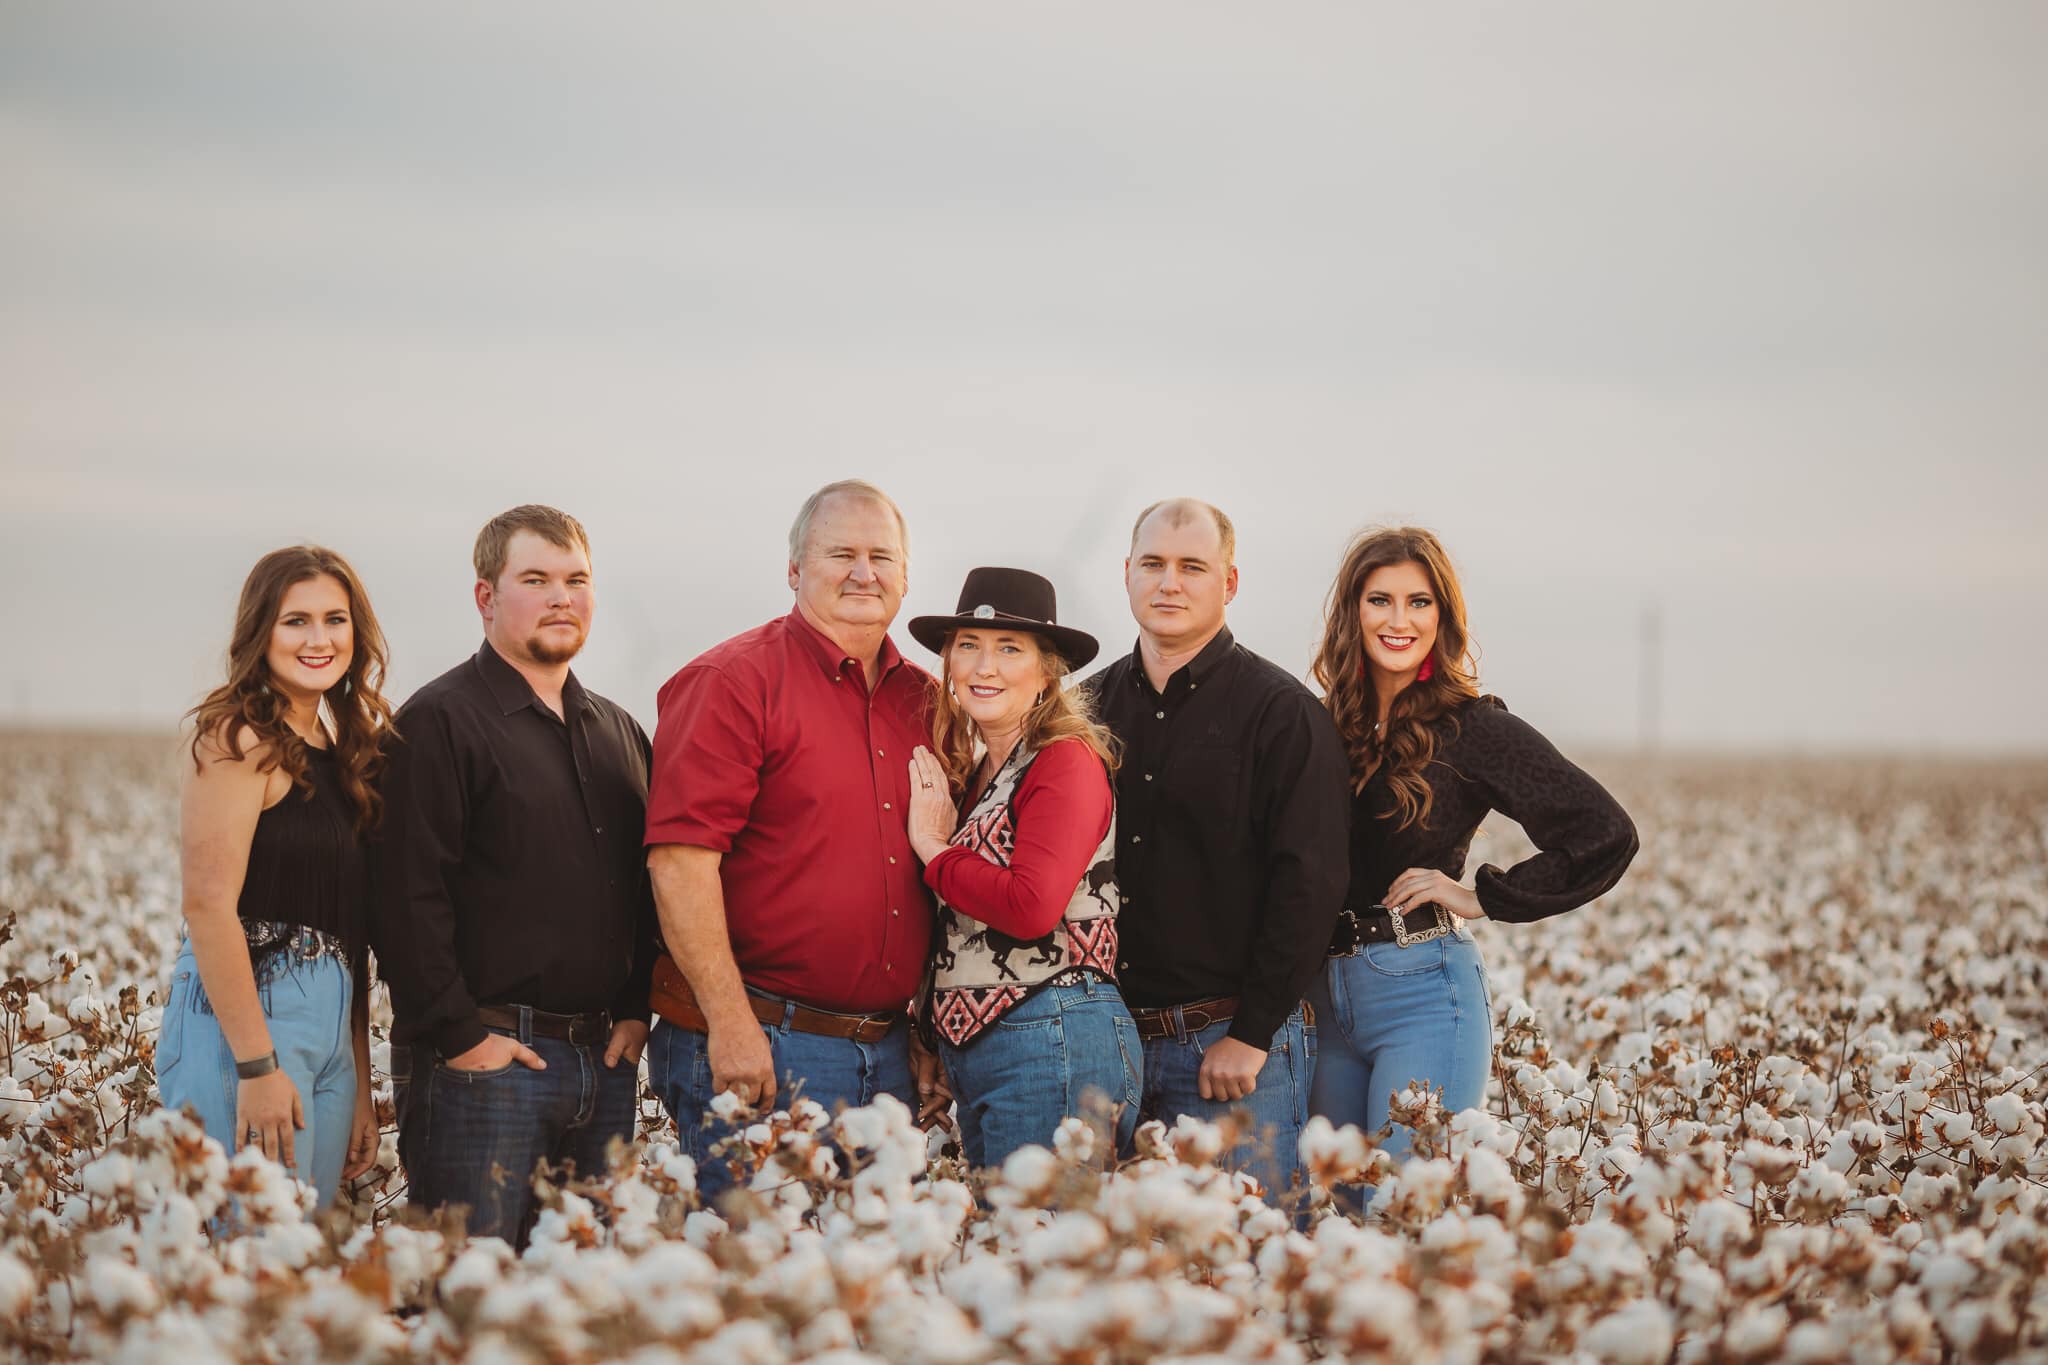 Lloyd Arthur and family in cotton field